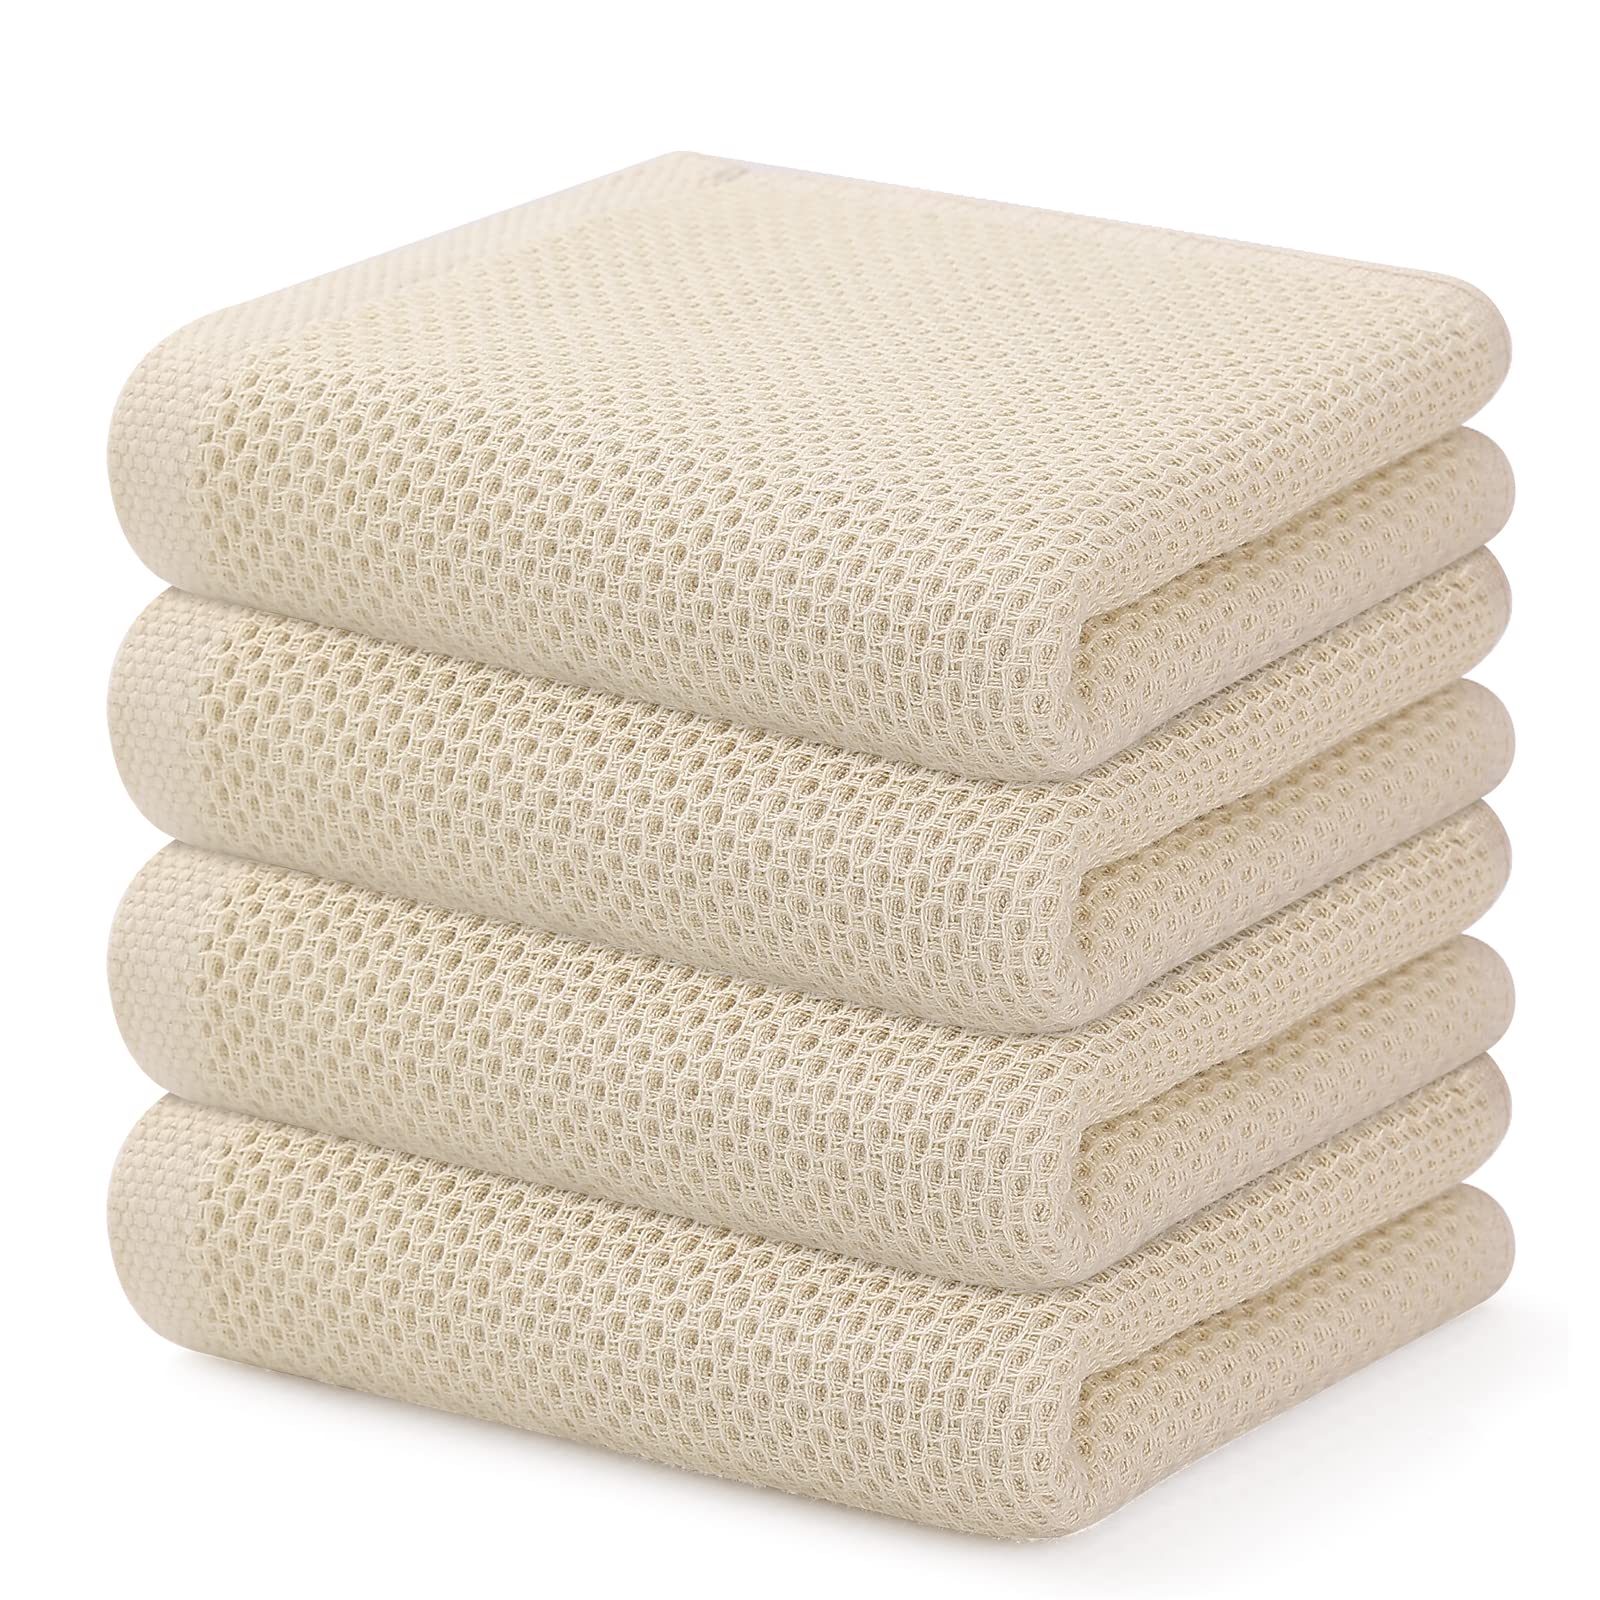 Kitinjoy 100% cotton Waffle Weave Kitchen Dish Towels, Super Soft and Absorbent Kitchen Towels, Set of 4, 13 in x 28 in